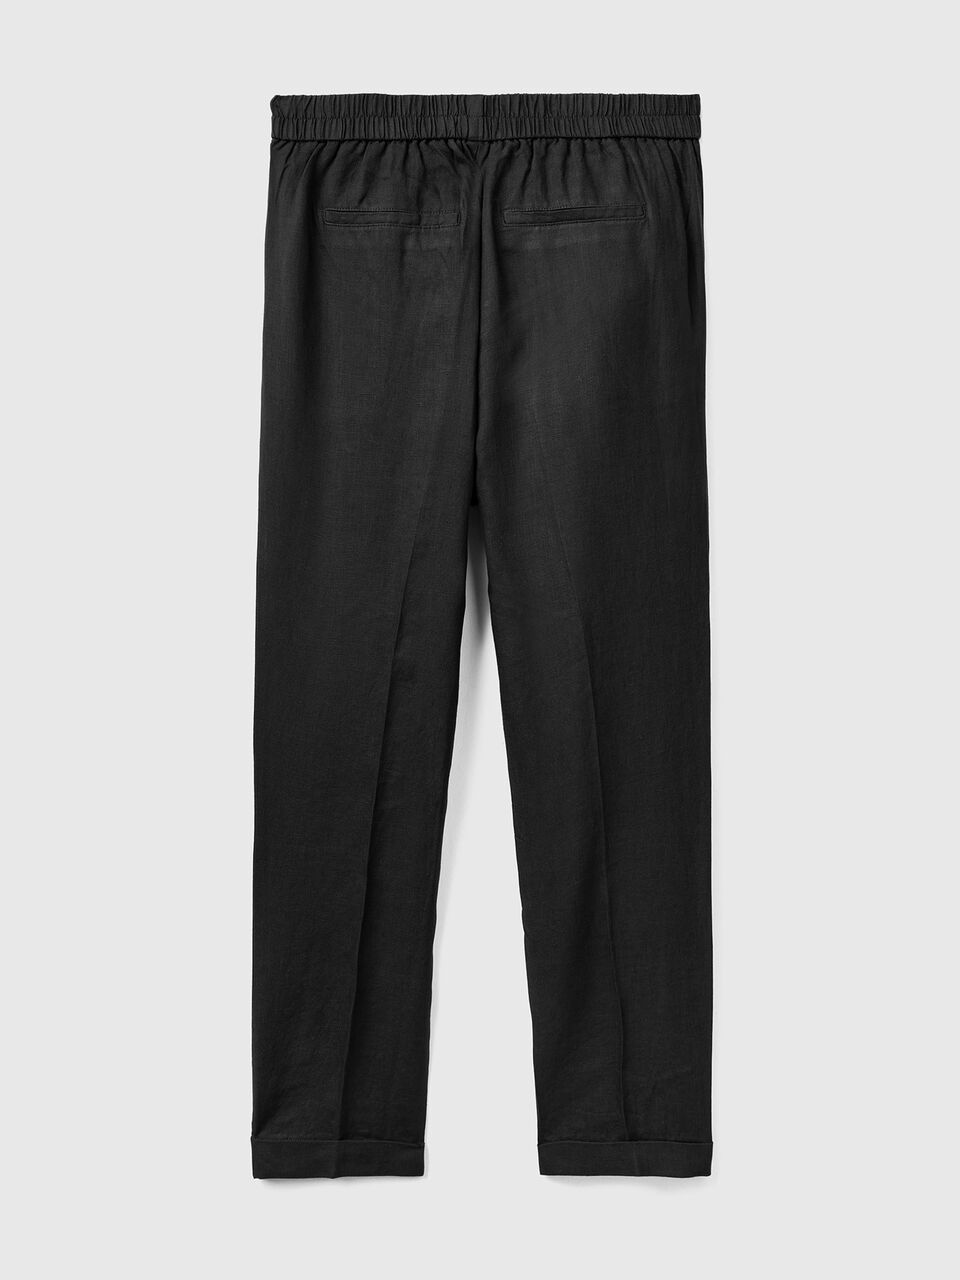 Cheap Cropped Trousers for £5